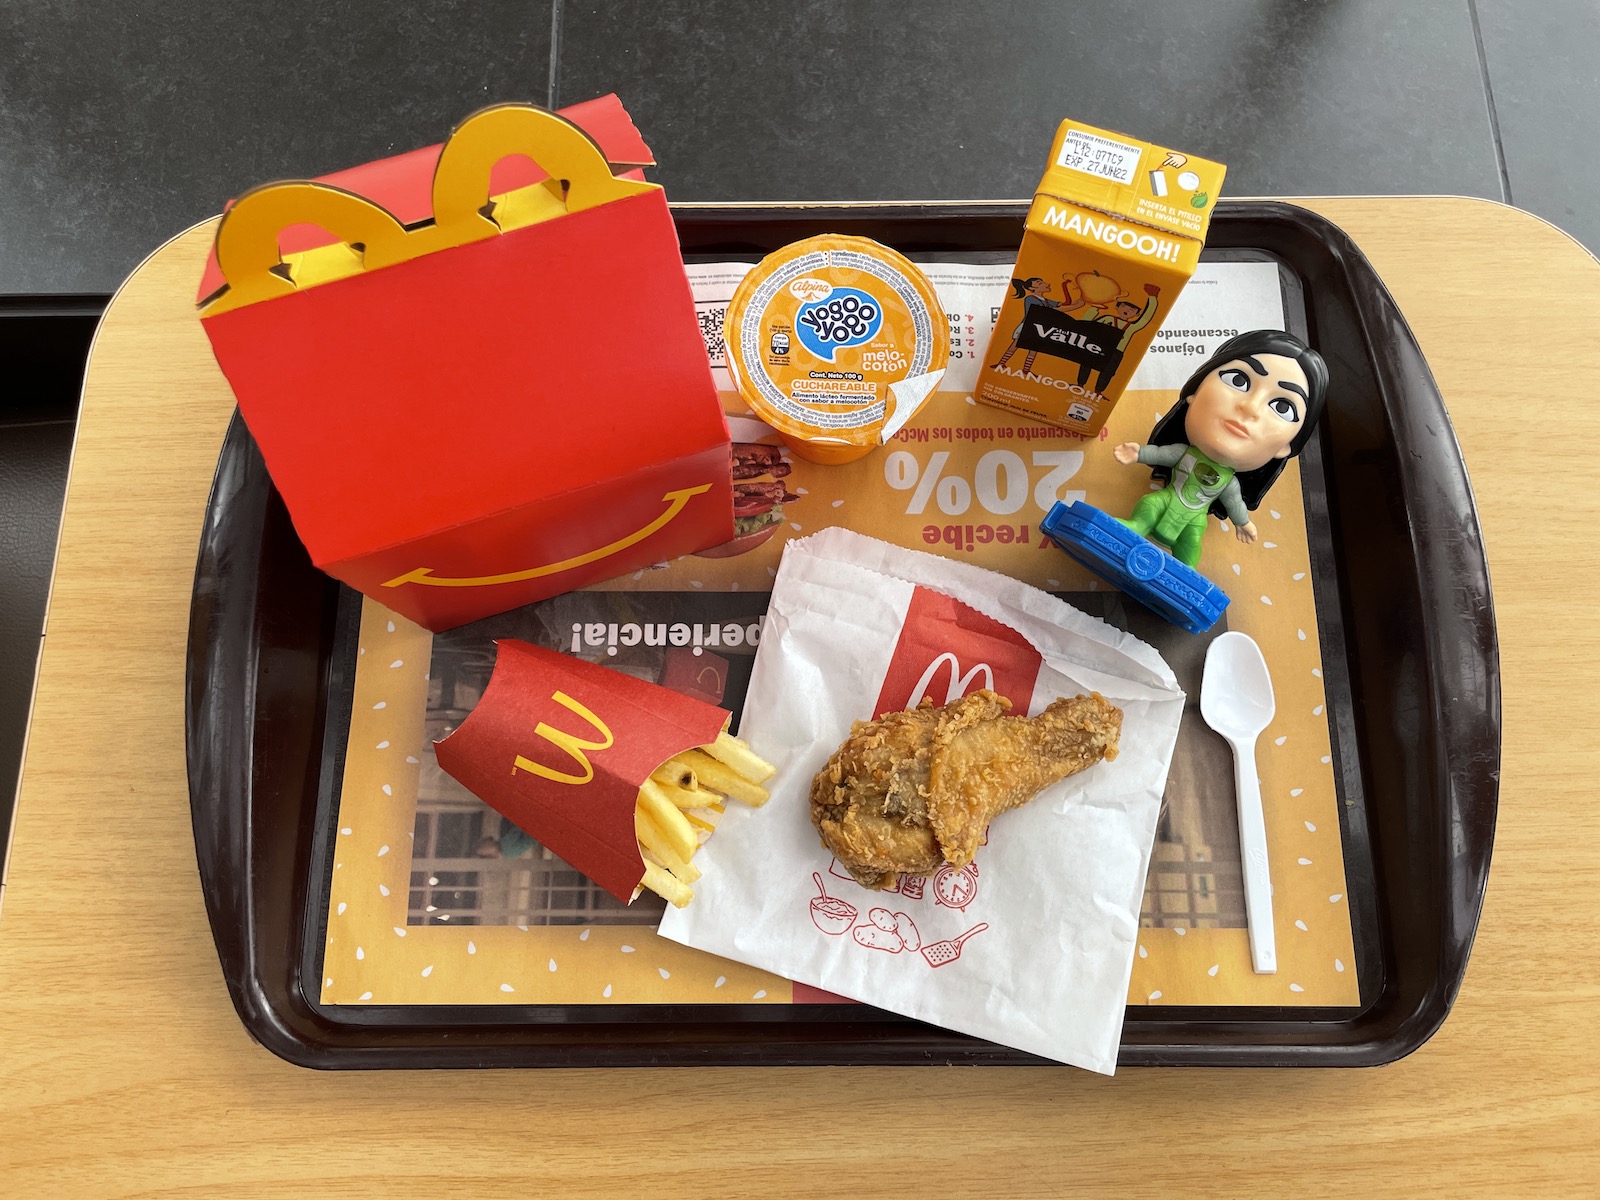 McDonald's Happy Meal from Bogota Colombia